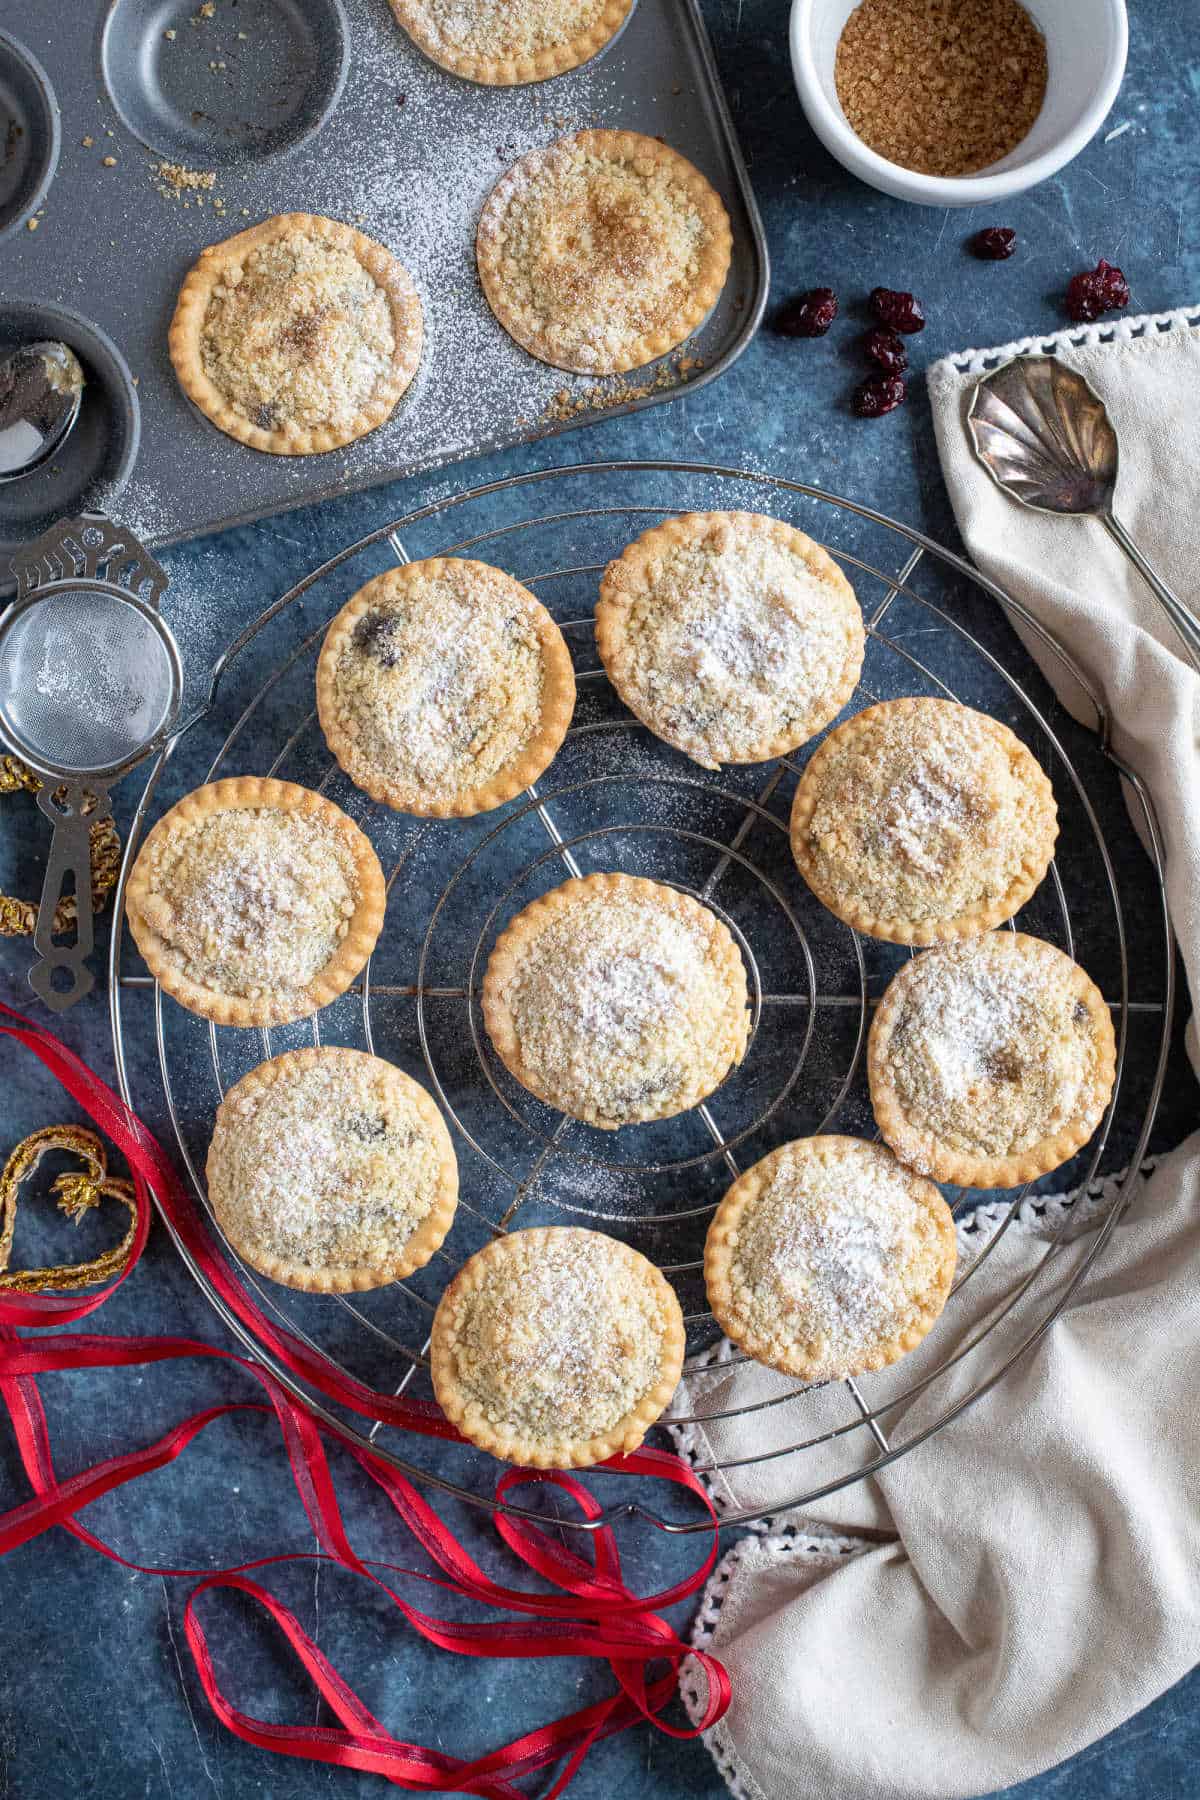 Crumble topped mince pies dusted with icing sugar.